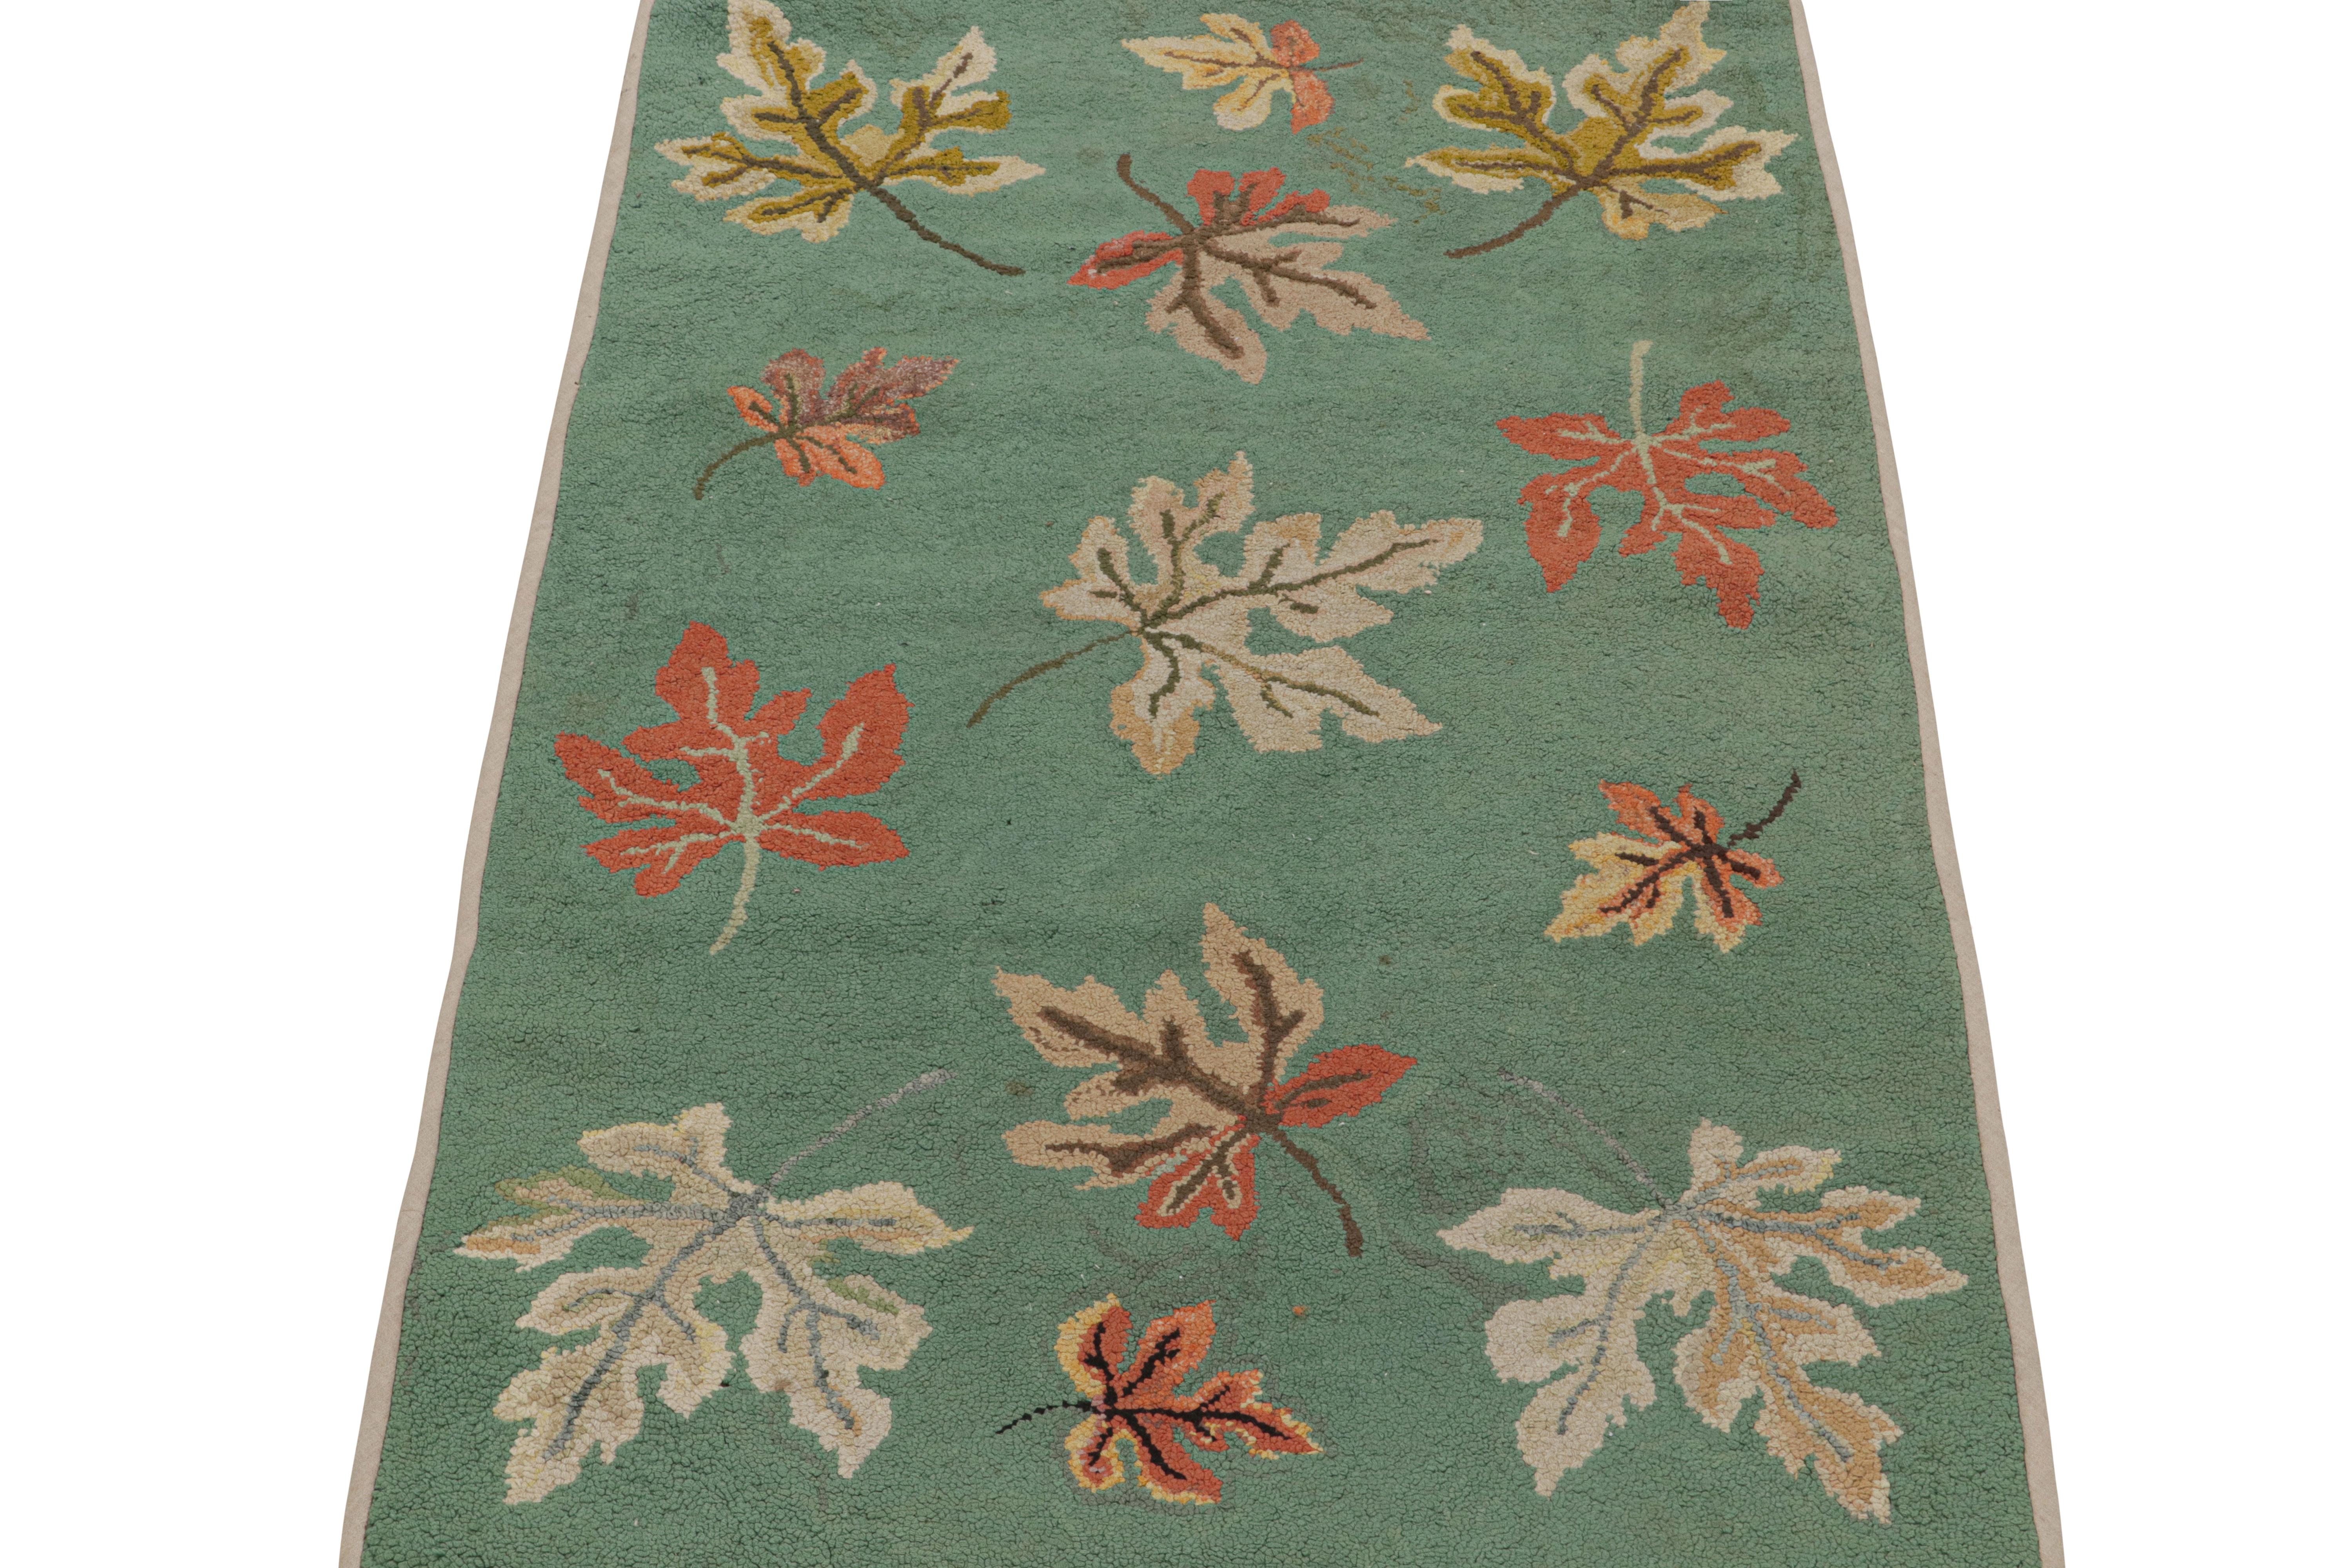 American Antique Hooked Rug in Seafoam with Leaf Floral Patterns, from Rug & Kilim For Sale